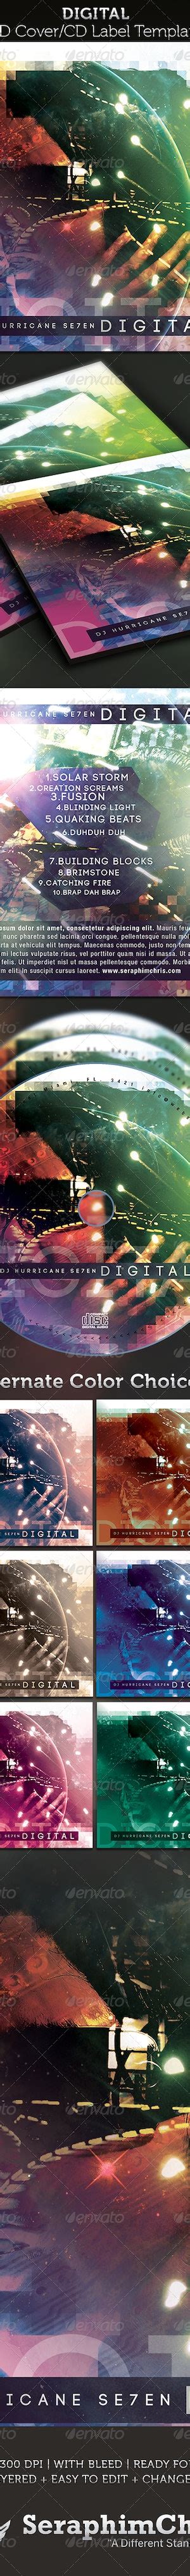 Digital Cd Cover Artwork Template By Seraphimchris Graphicriver